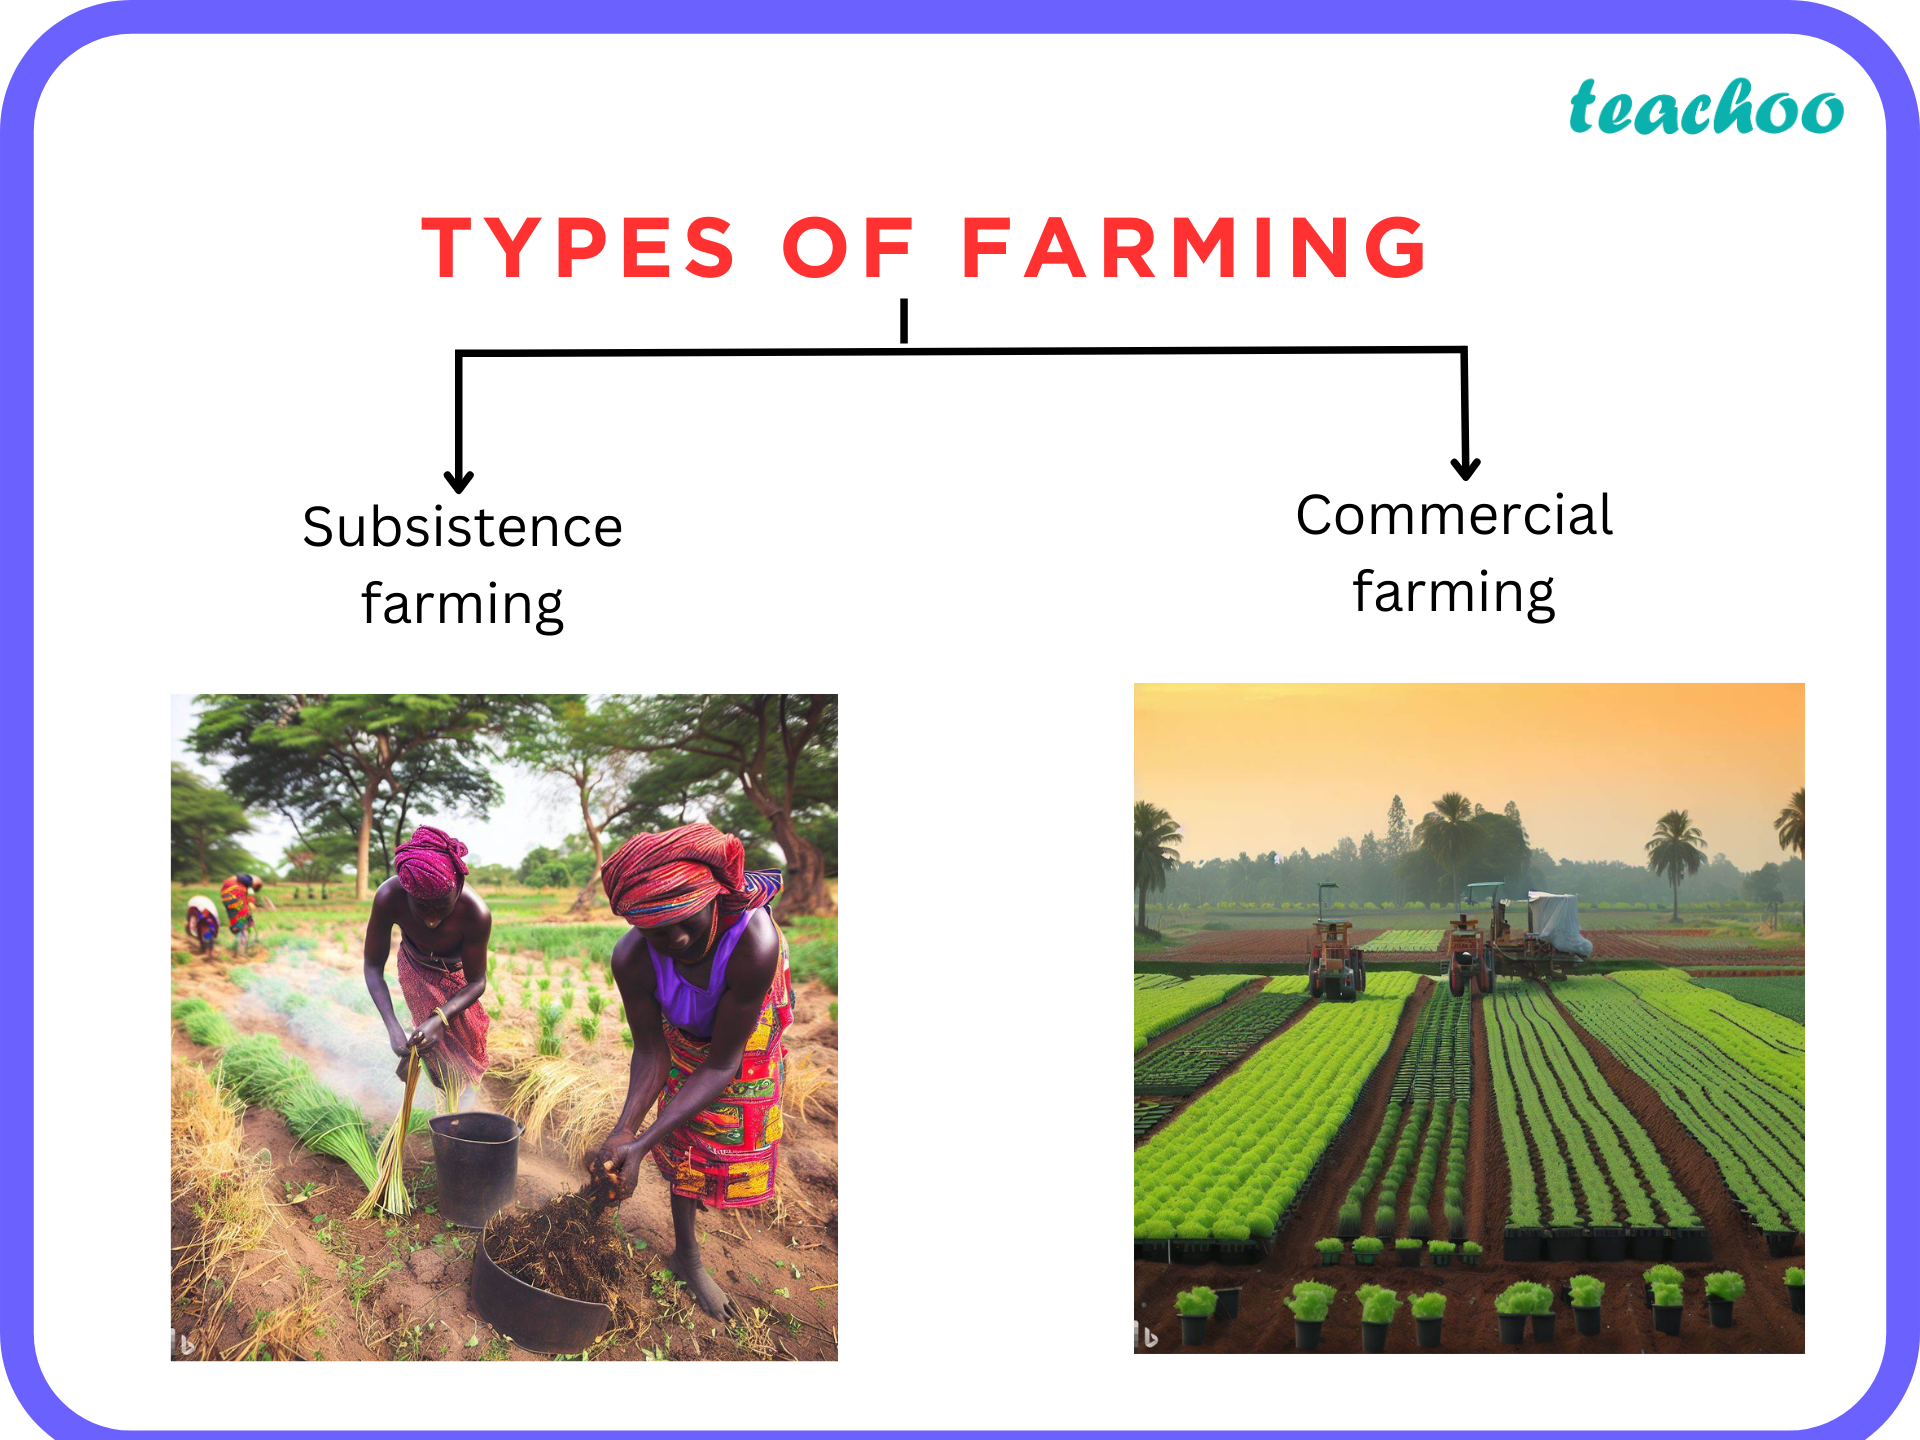 What is the difference between subsistence farming and commercial